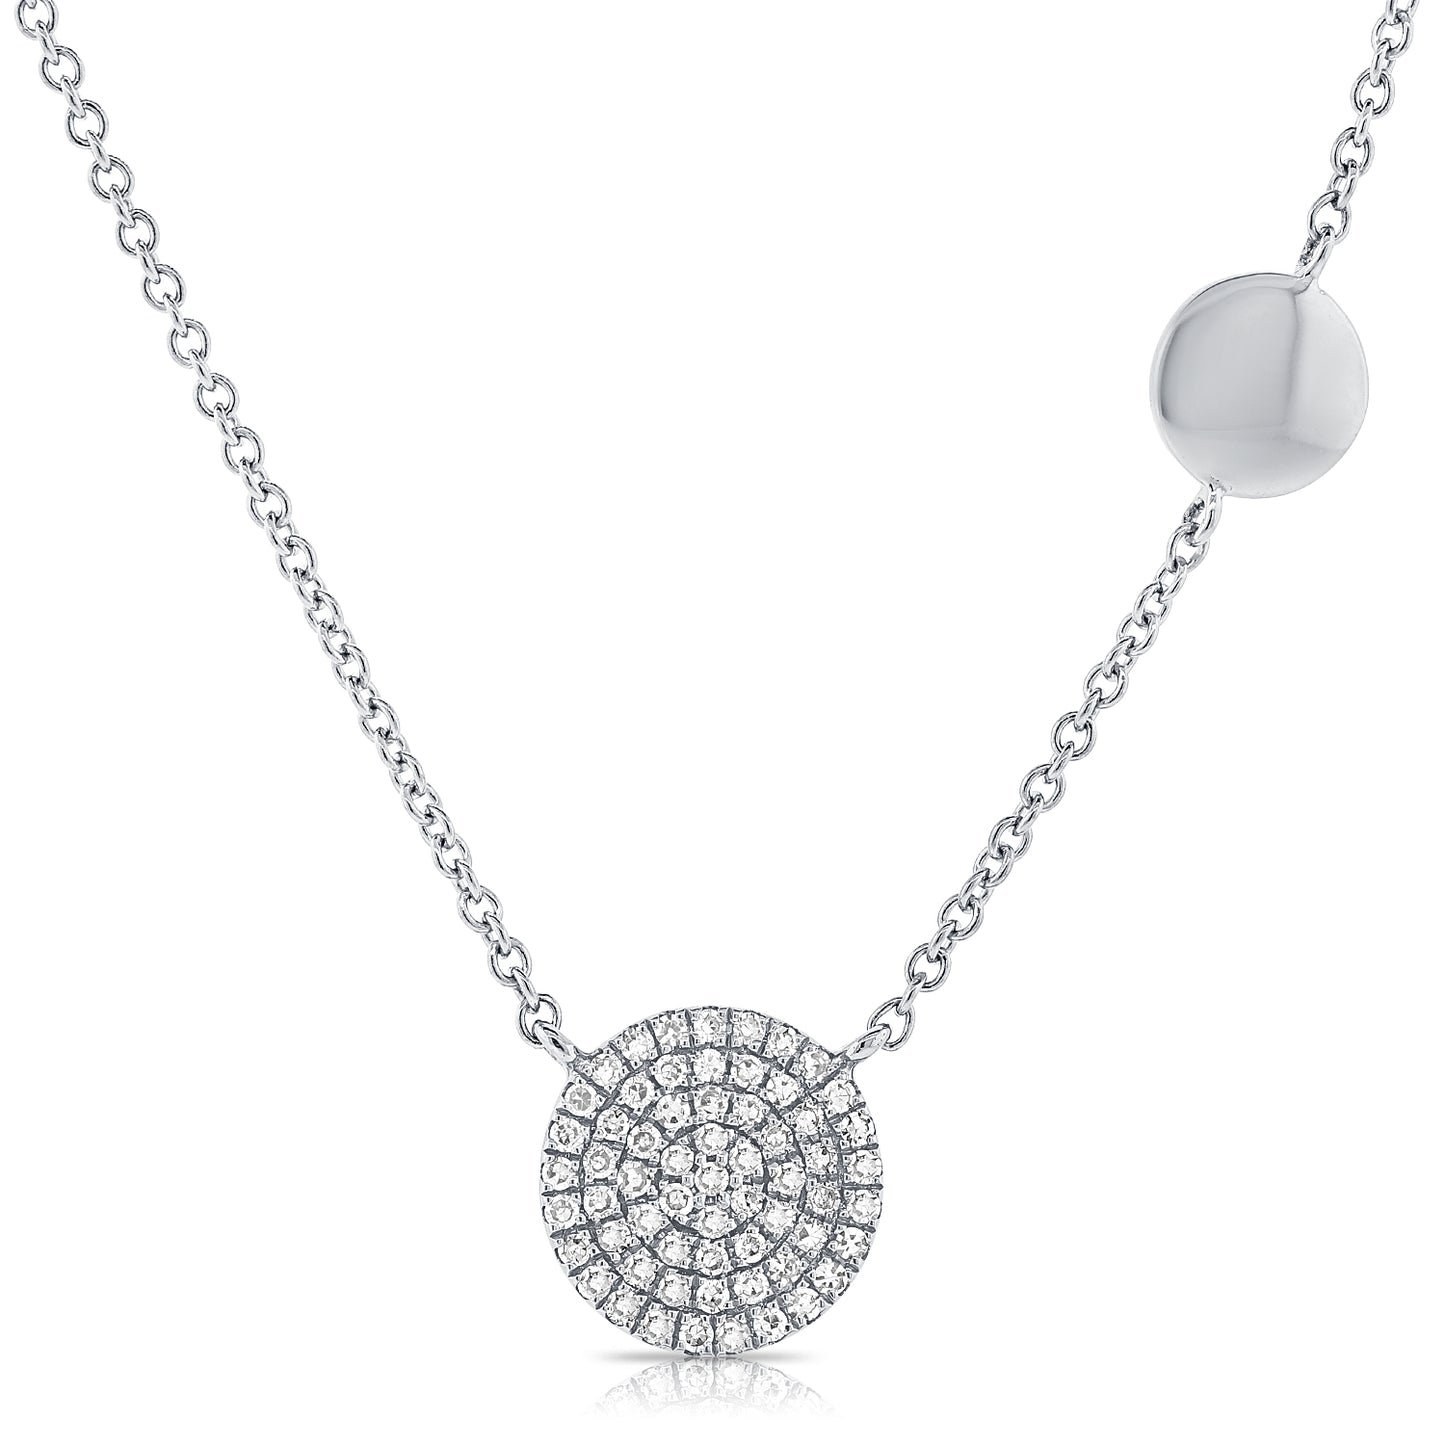 Pave Diamond Disc + Gold Disc Chain Necklace